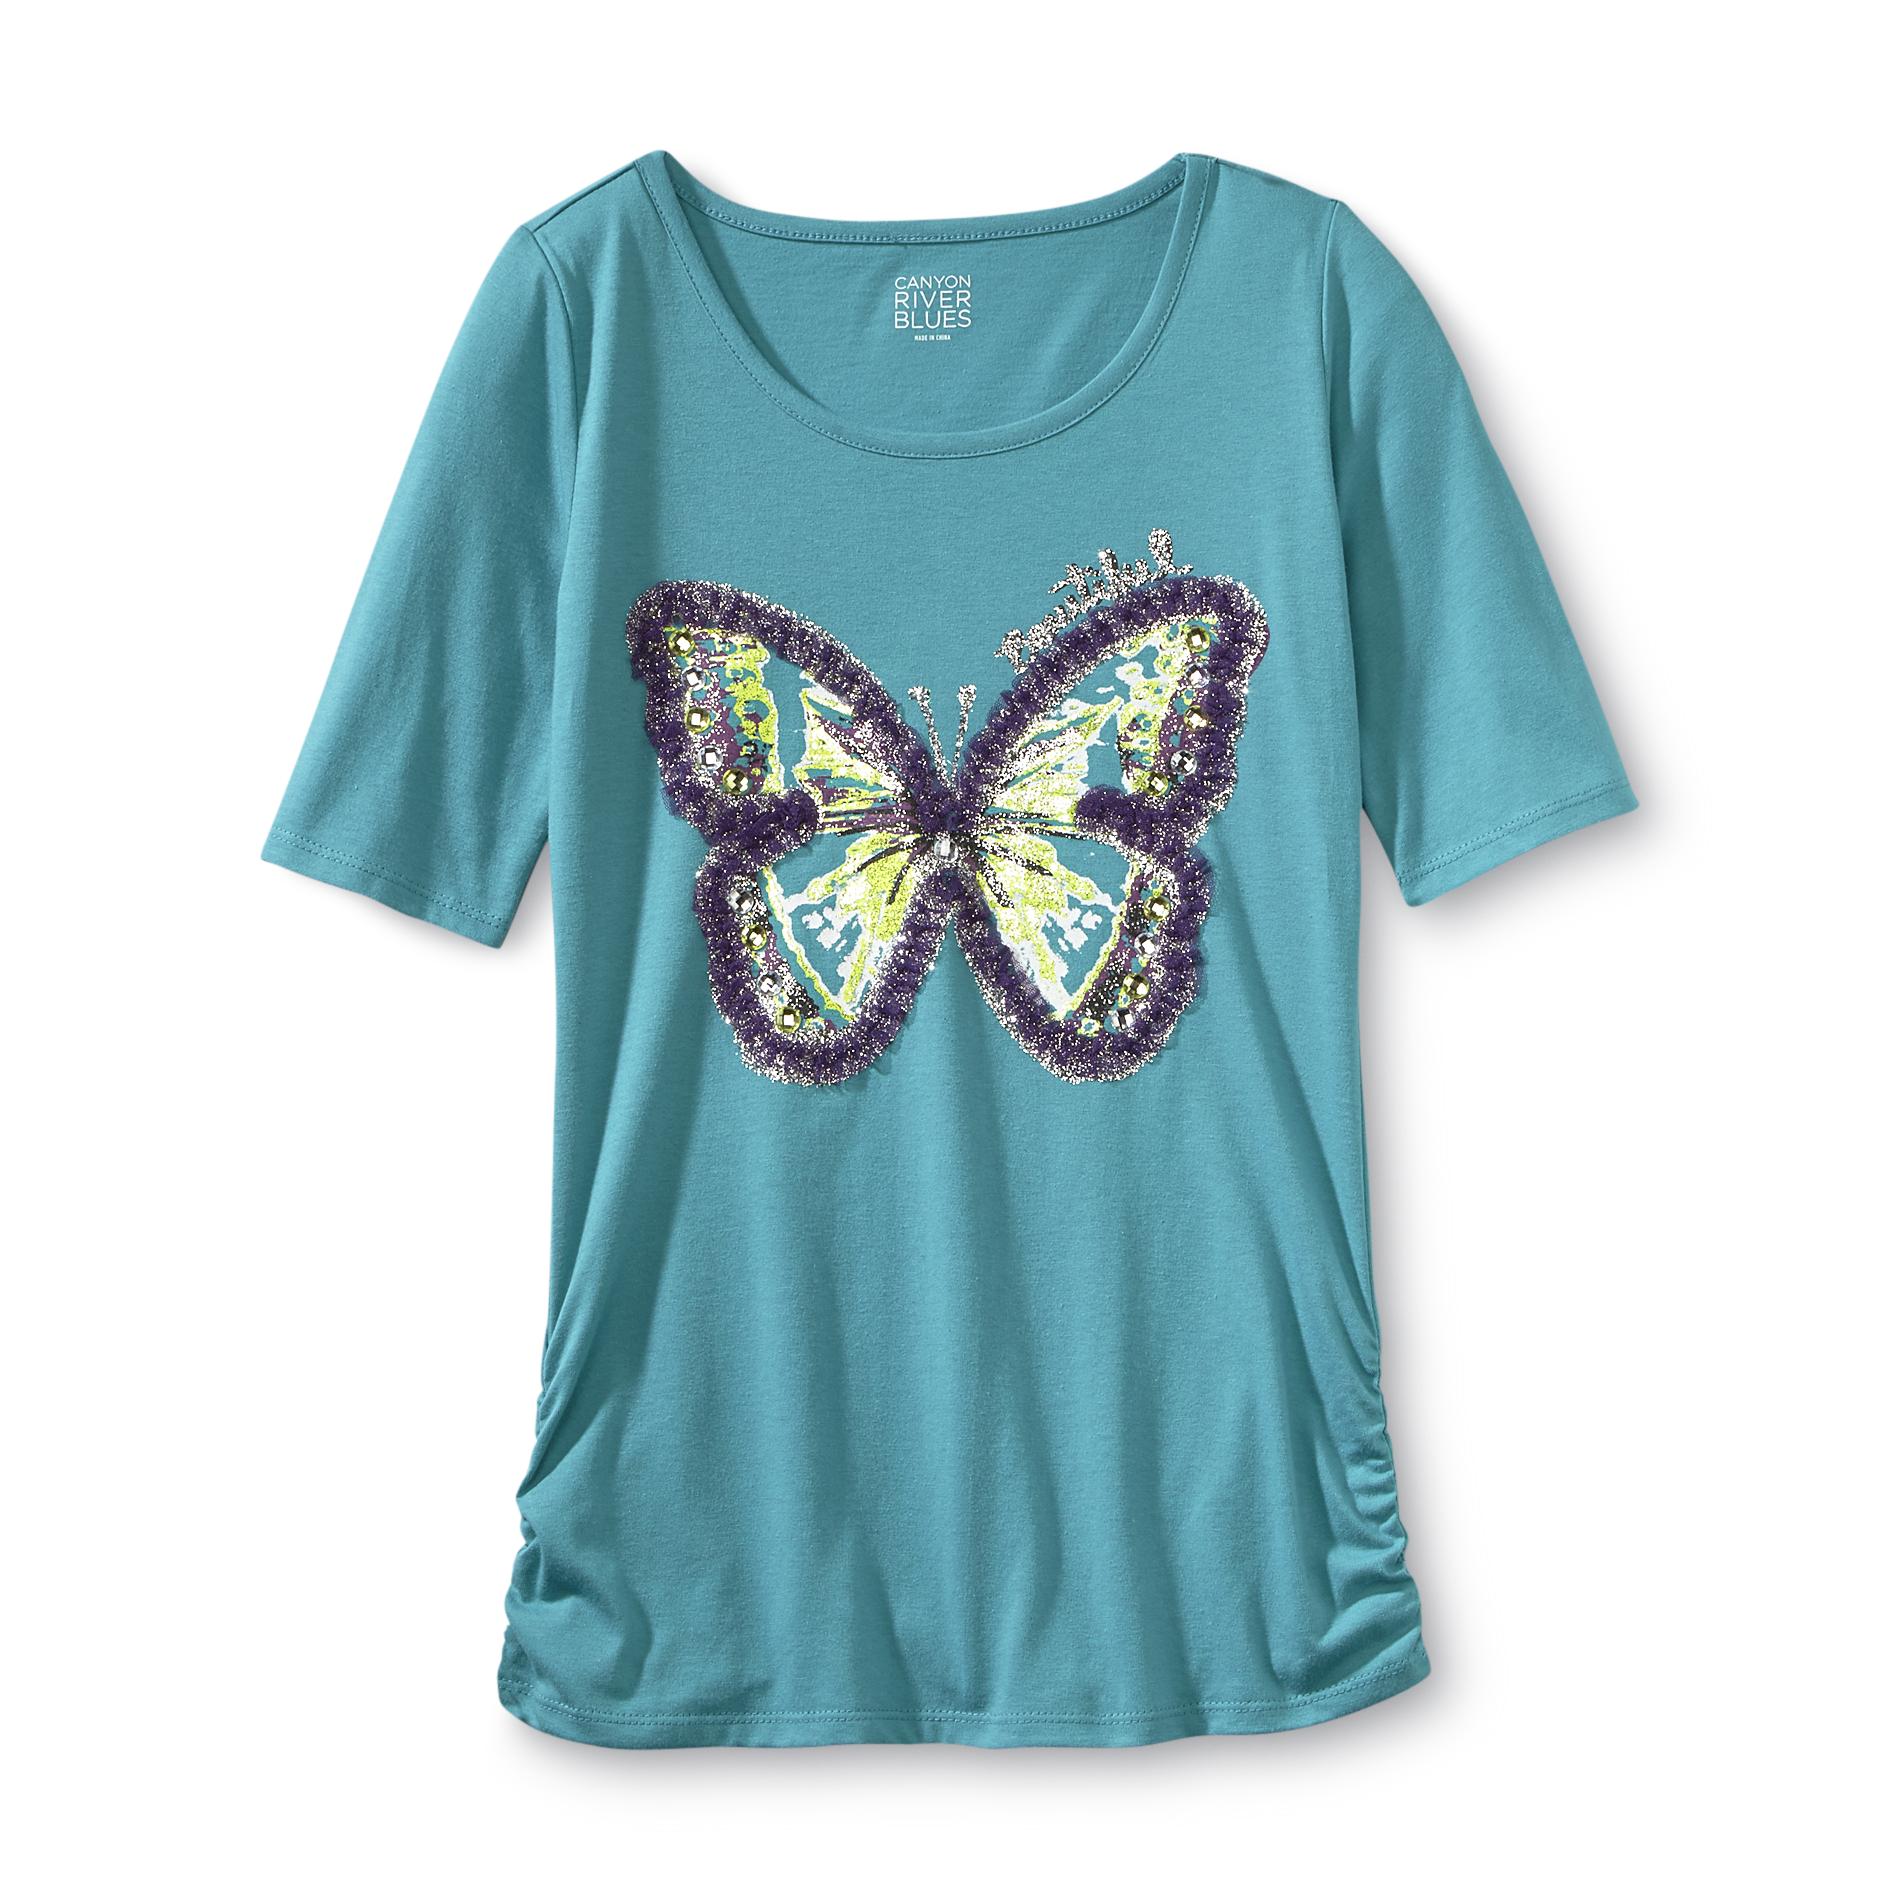 Canyon River Blues Girl's Graphic T-Shirt - Butterfly